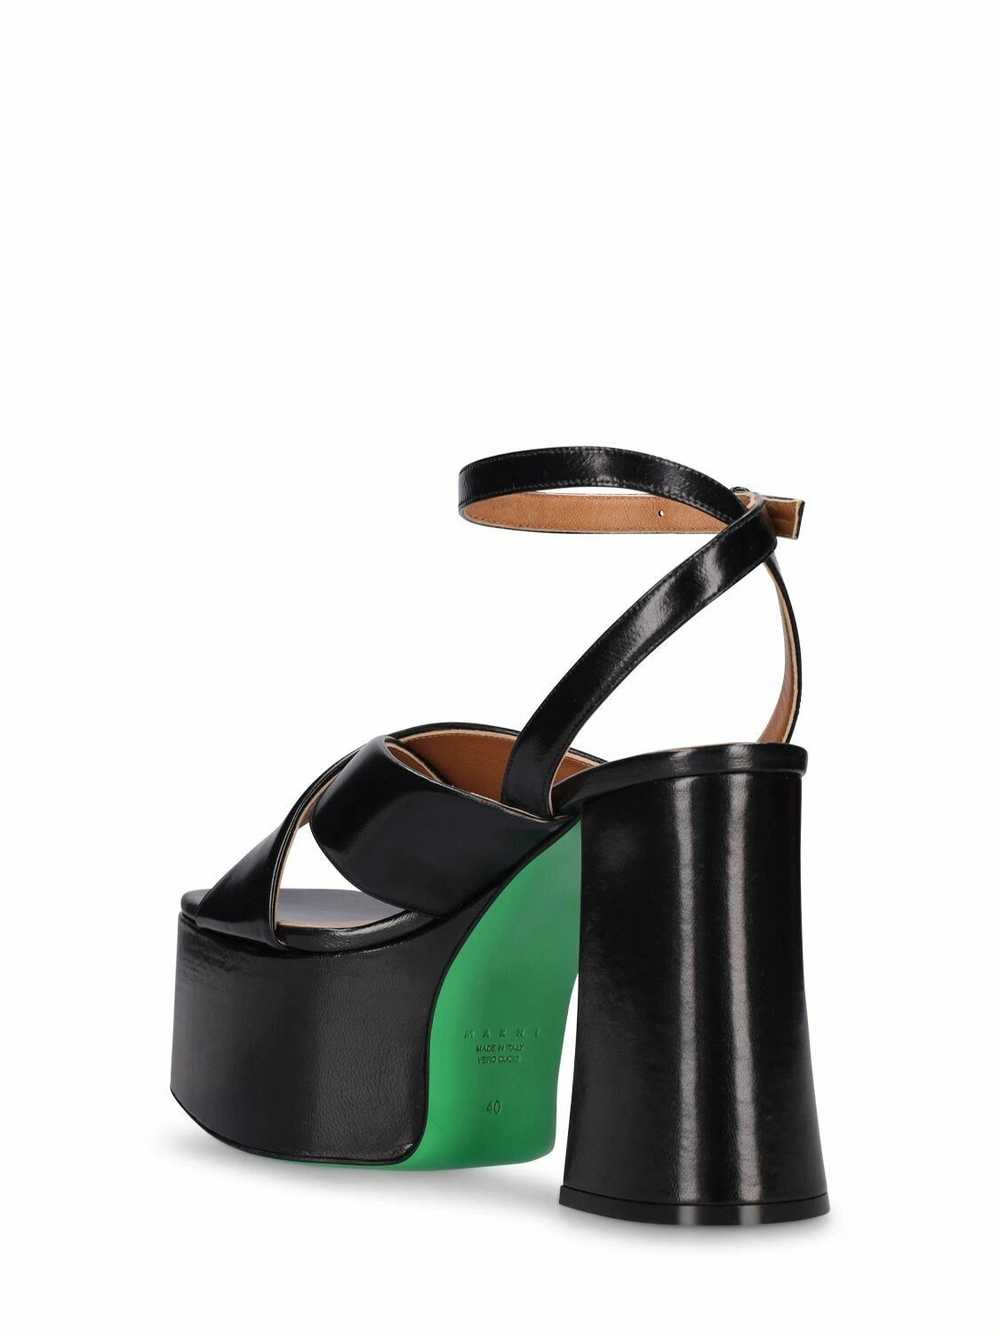 Marni o1w1db10524 Patent Leather Sandals in Black - image 3